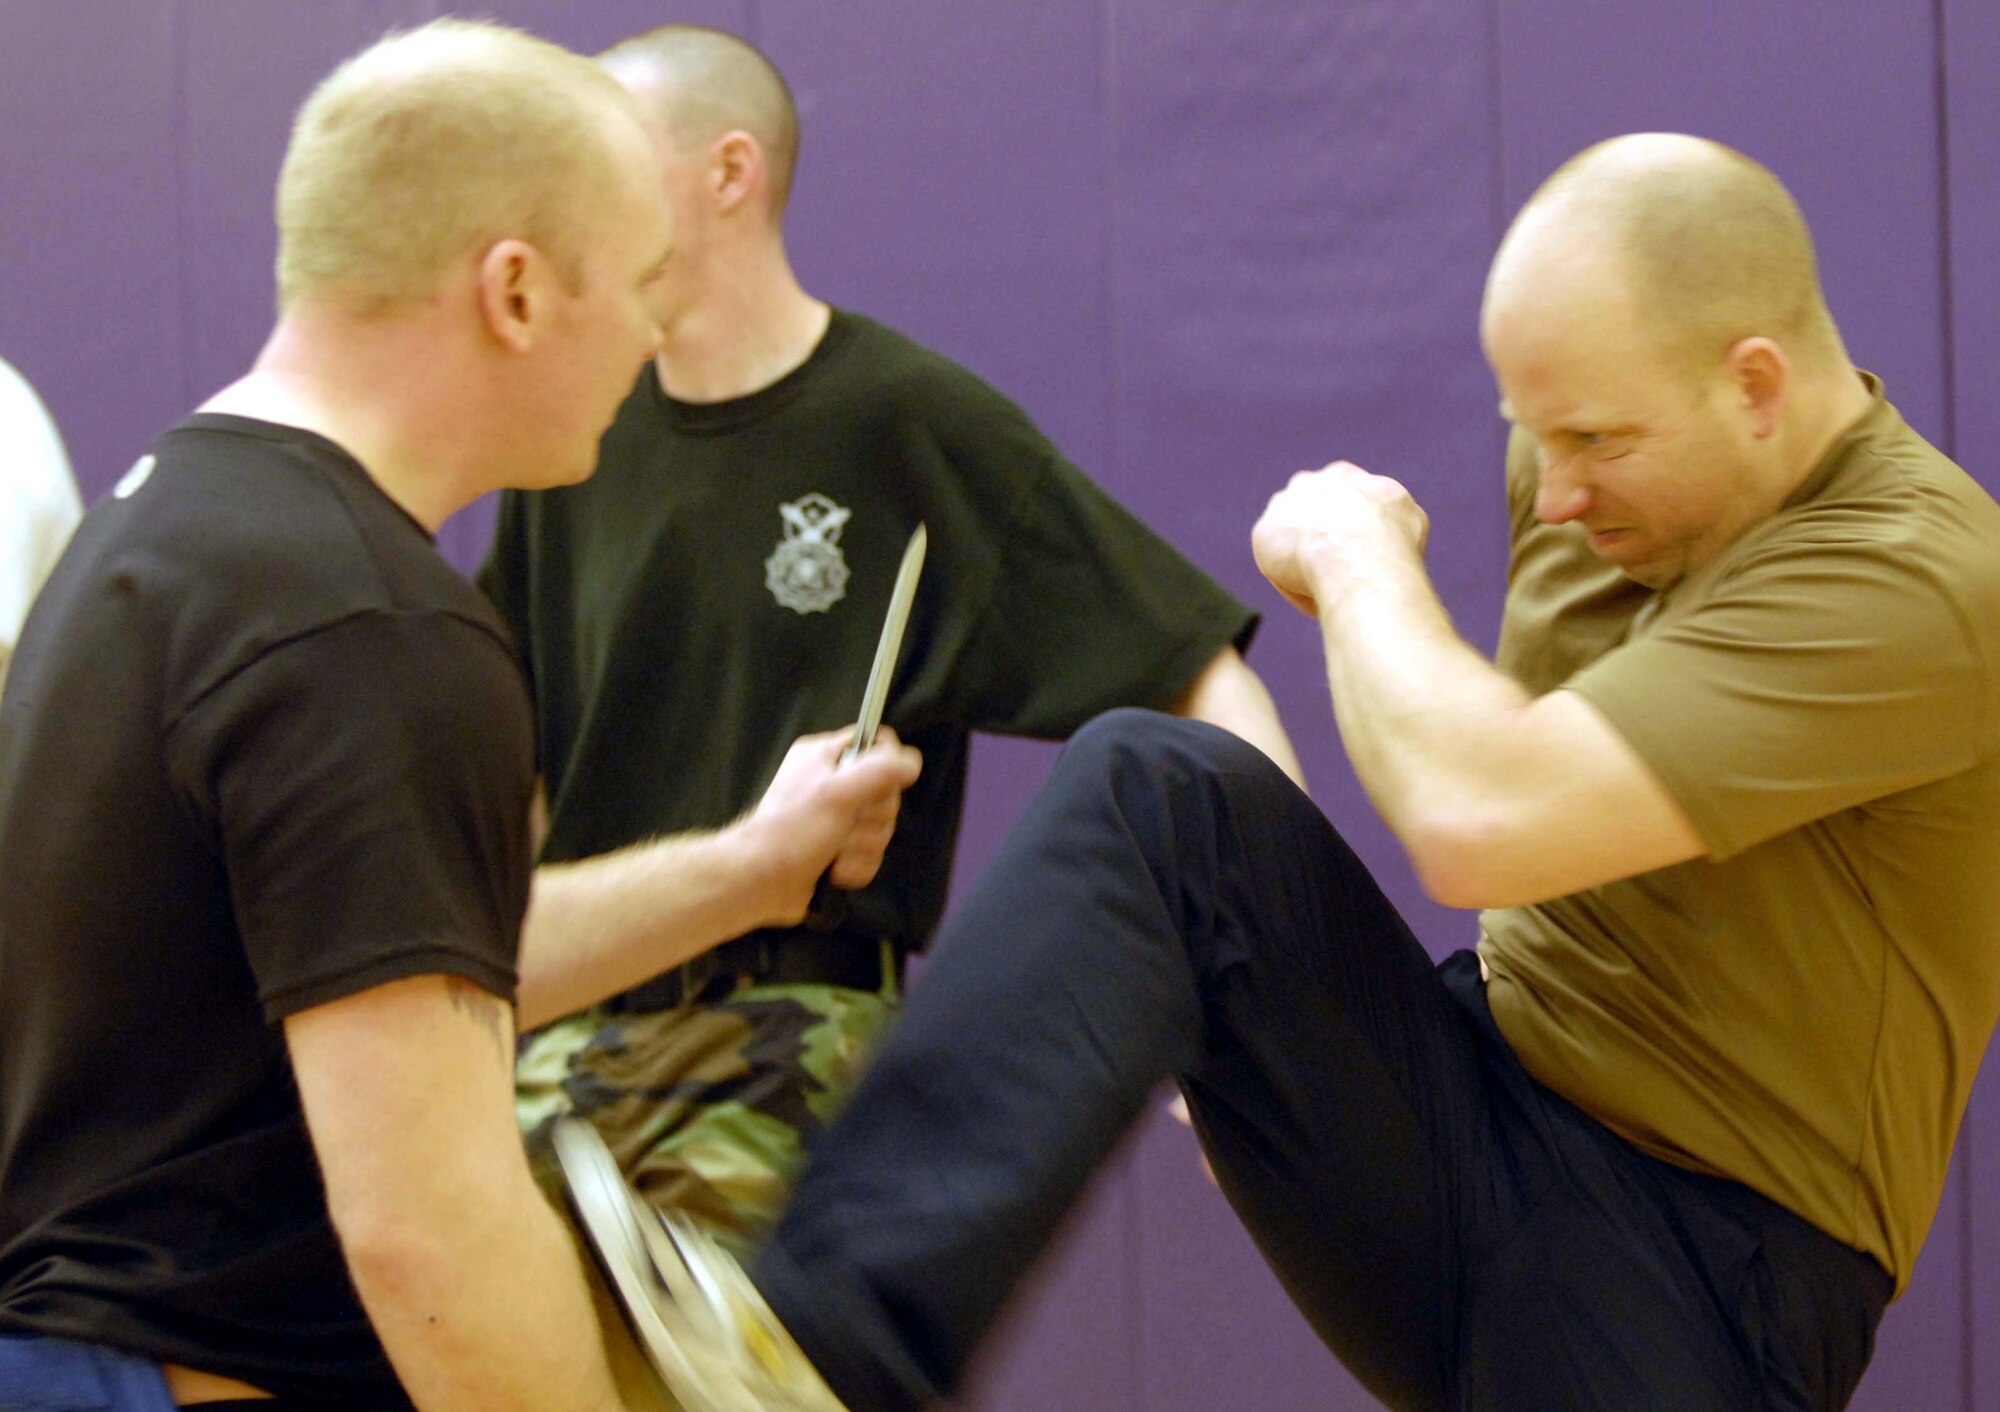 Master Sgt. Ted Hemmah, left, and Master Sgt. Mike Bier, 934th Security Forces Squadron, practice moves during a Krav Maga class at the 934th Fitness Center. Air Force photo/Master. Sgt. Paul Zadach.